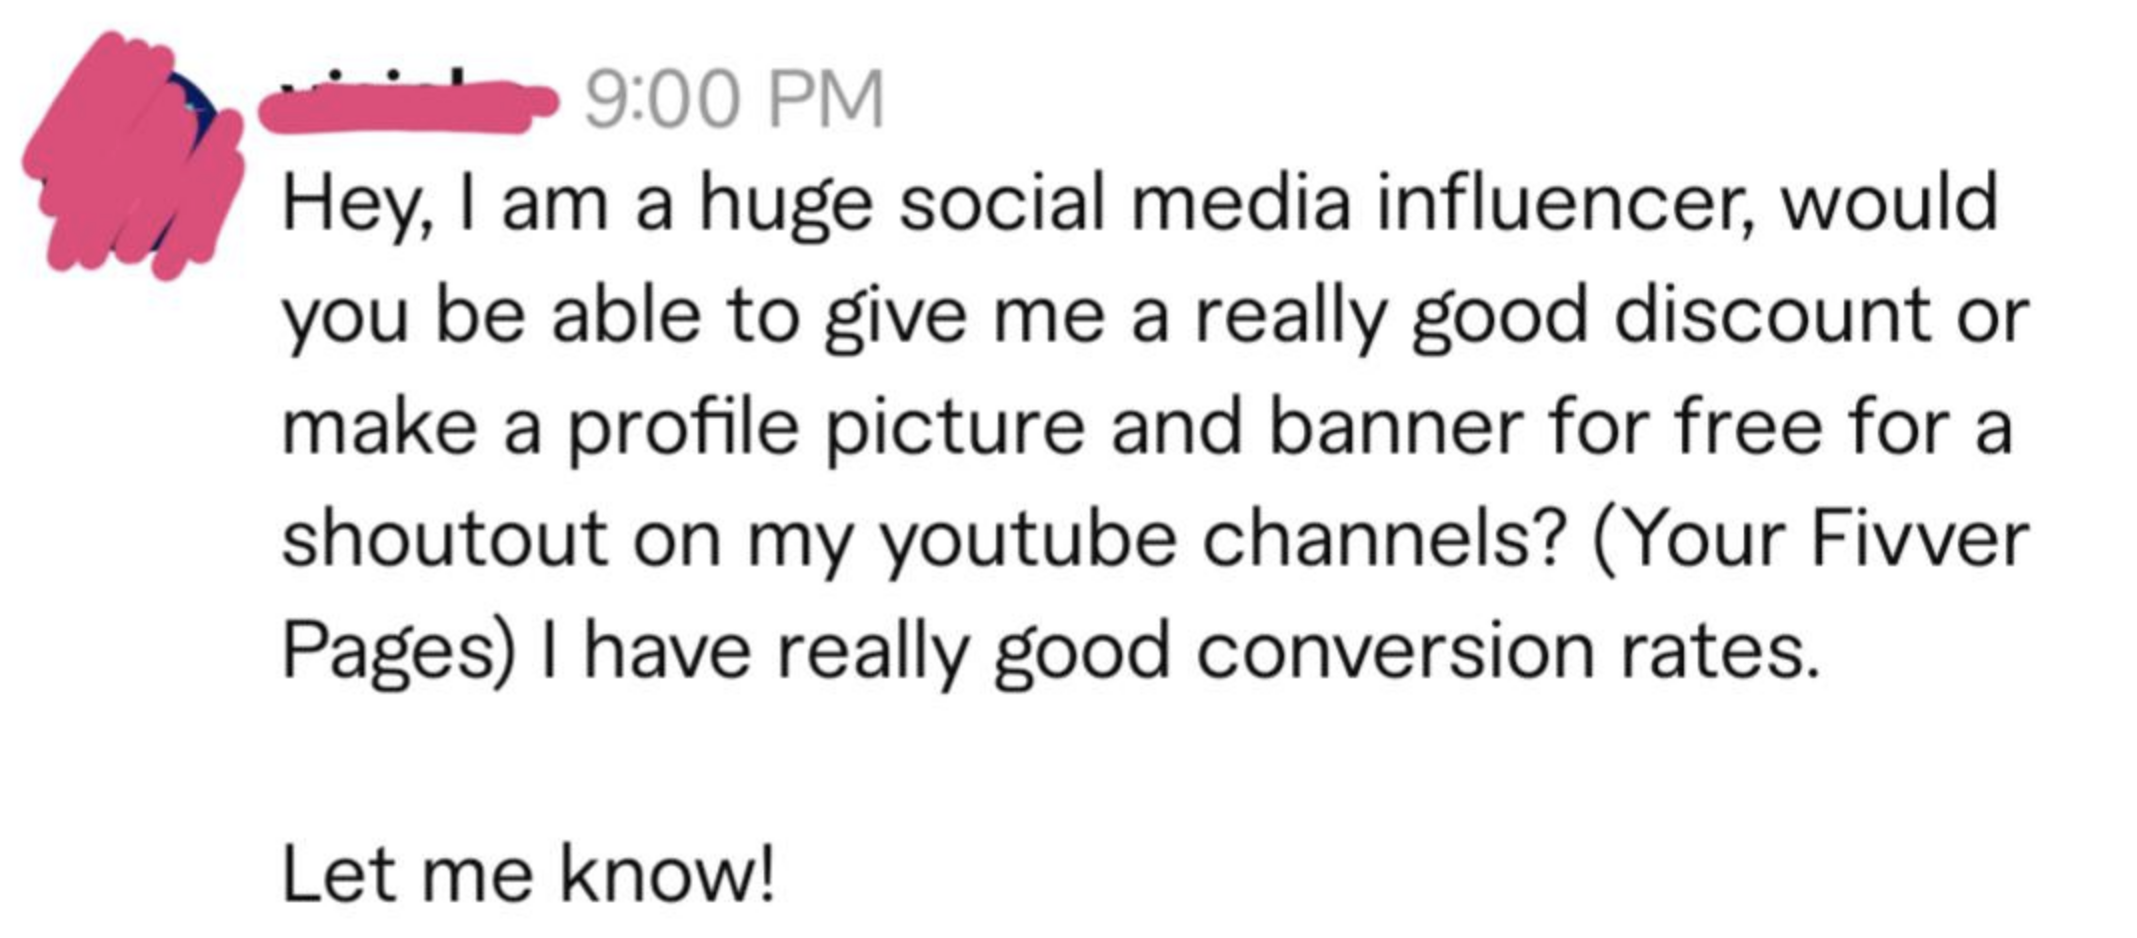 &quot;Hey, I am a huge social media influencer, would you be able to give me a really good discount or make a profile picture and banner for free for a shoutout on my youtube channels?&quot;